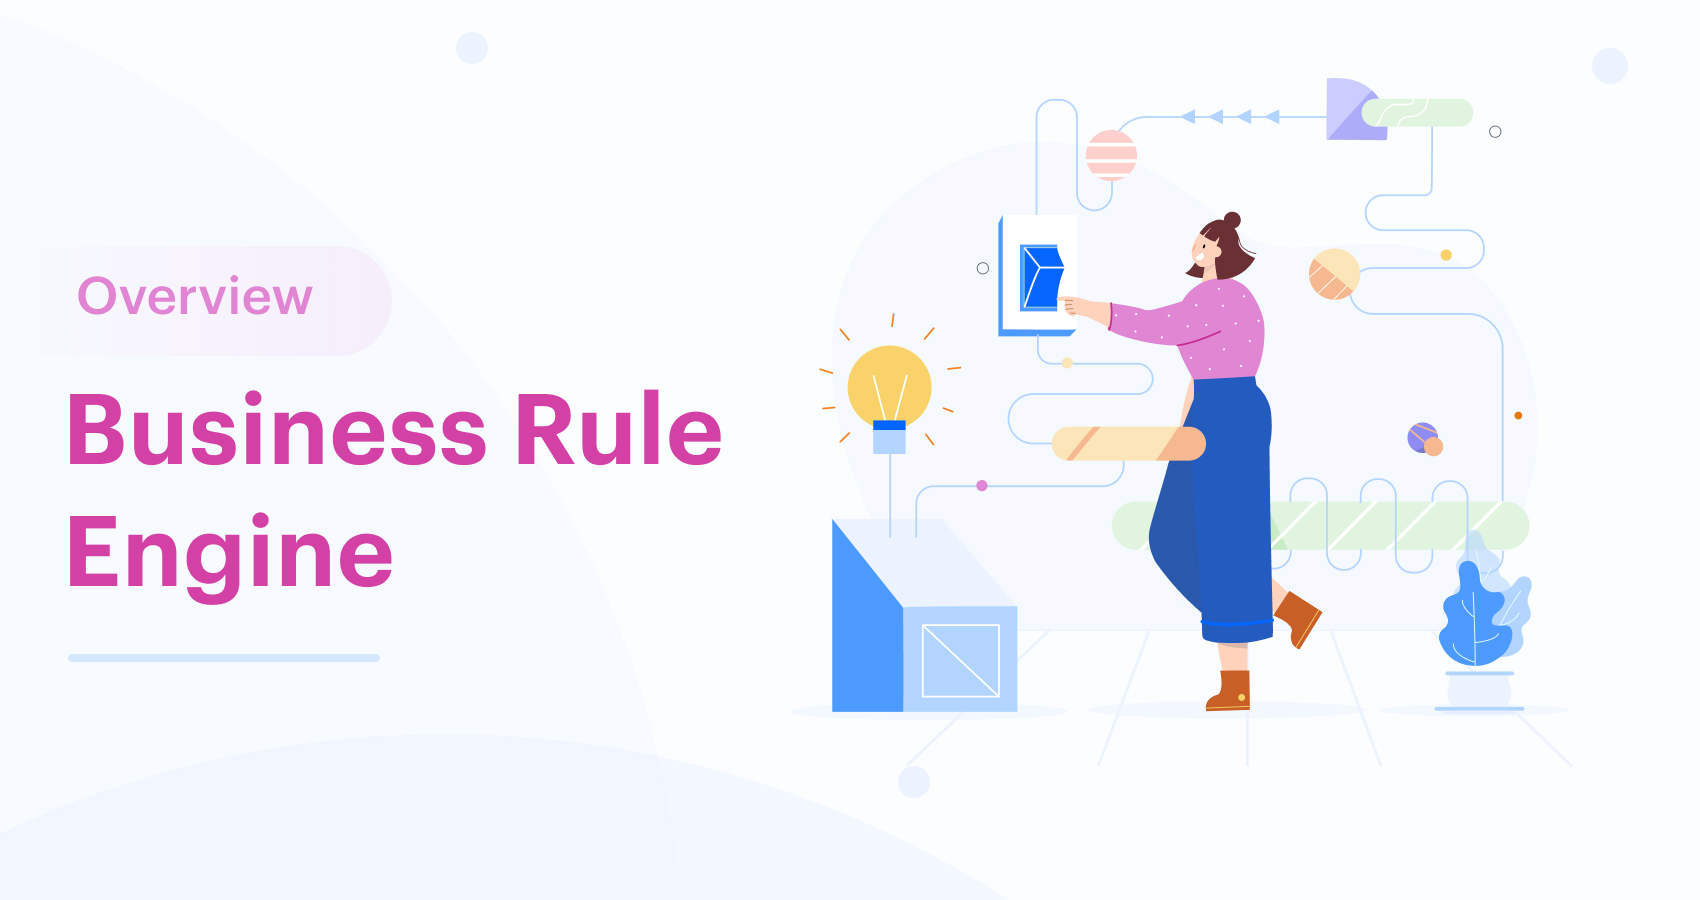 What is Business Rule Engine?